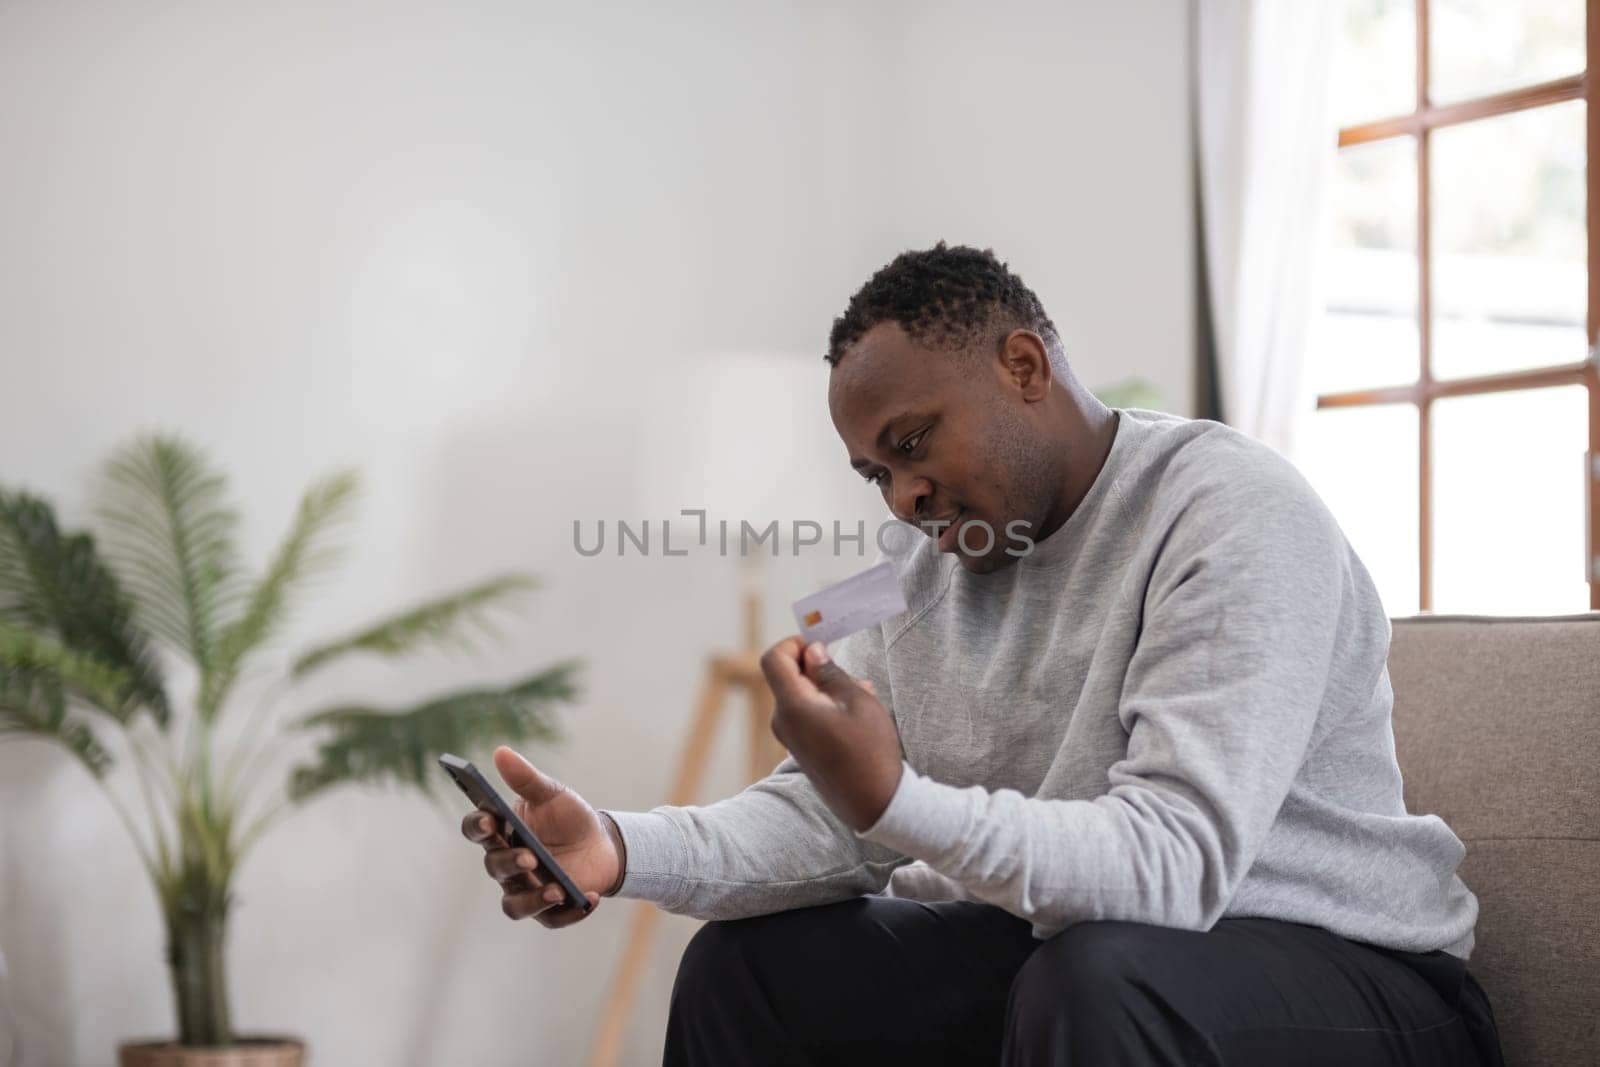 African American man sitting on a sofa at home, looking at a credit card while holding a smartphone, bright window light